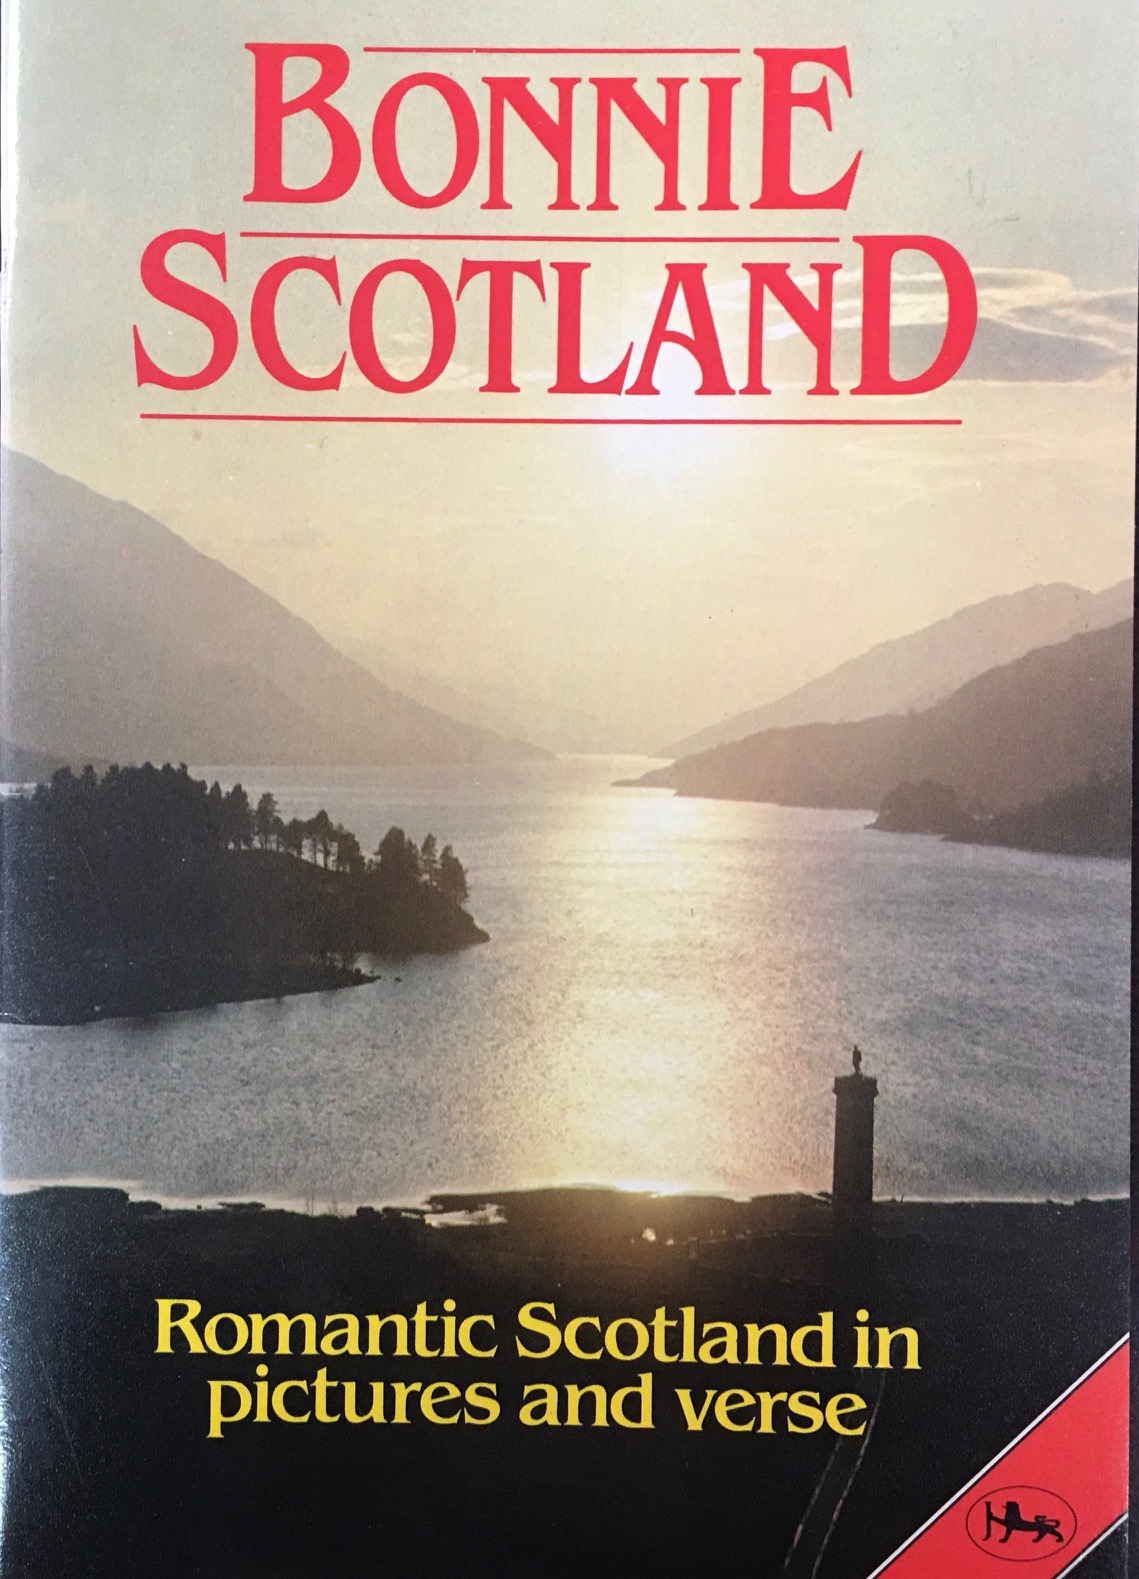 Image for Bonnie Scotland: Romantic Scotland in Pictures and Verse